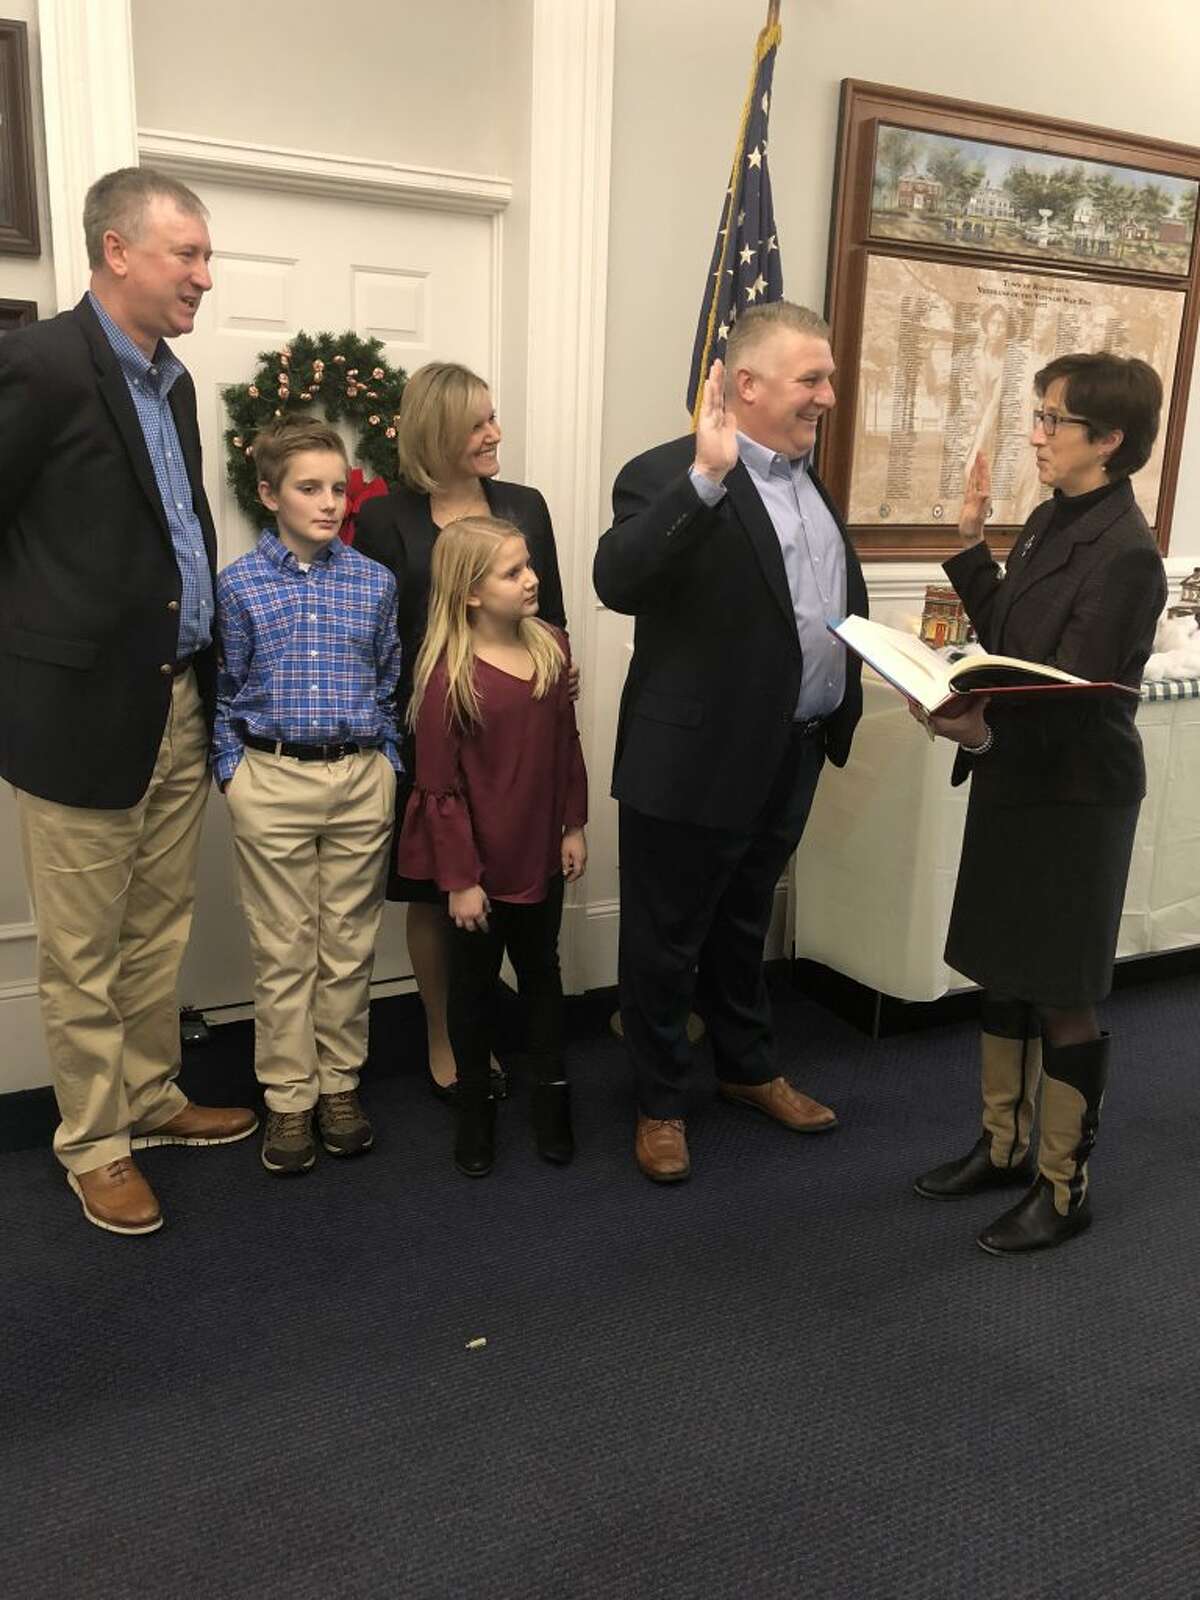 Wayne Floegel, second to the right, was sworn in as the new Republican Registrar on Friday, Jan. 4, by Town Clerk Wendy Lionetti, far right. Floegel was joined by his wife, Liz and his kids. John Collins, left, secretary of the Republican Town Committee, was there to witness the ceremony.